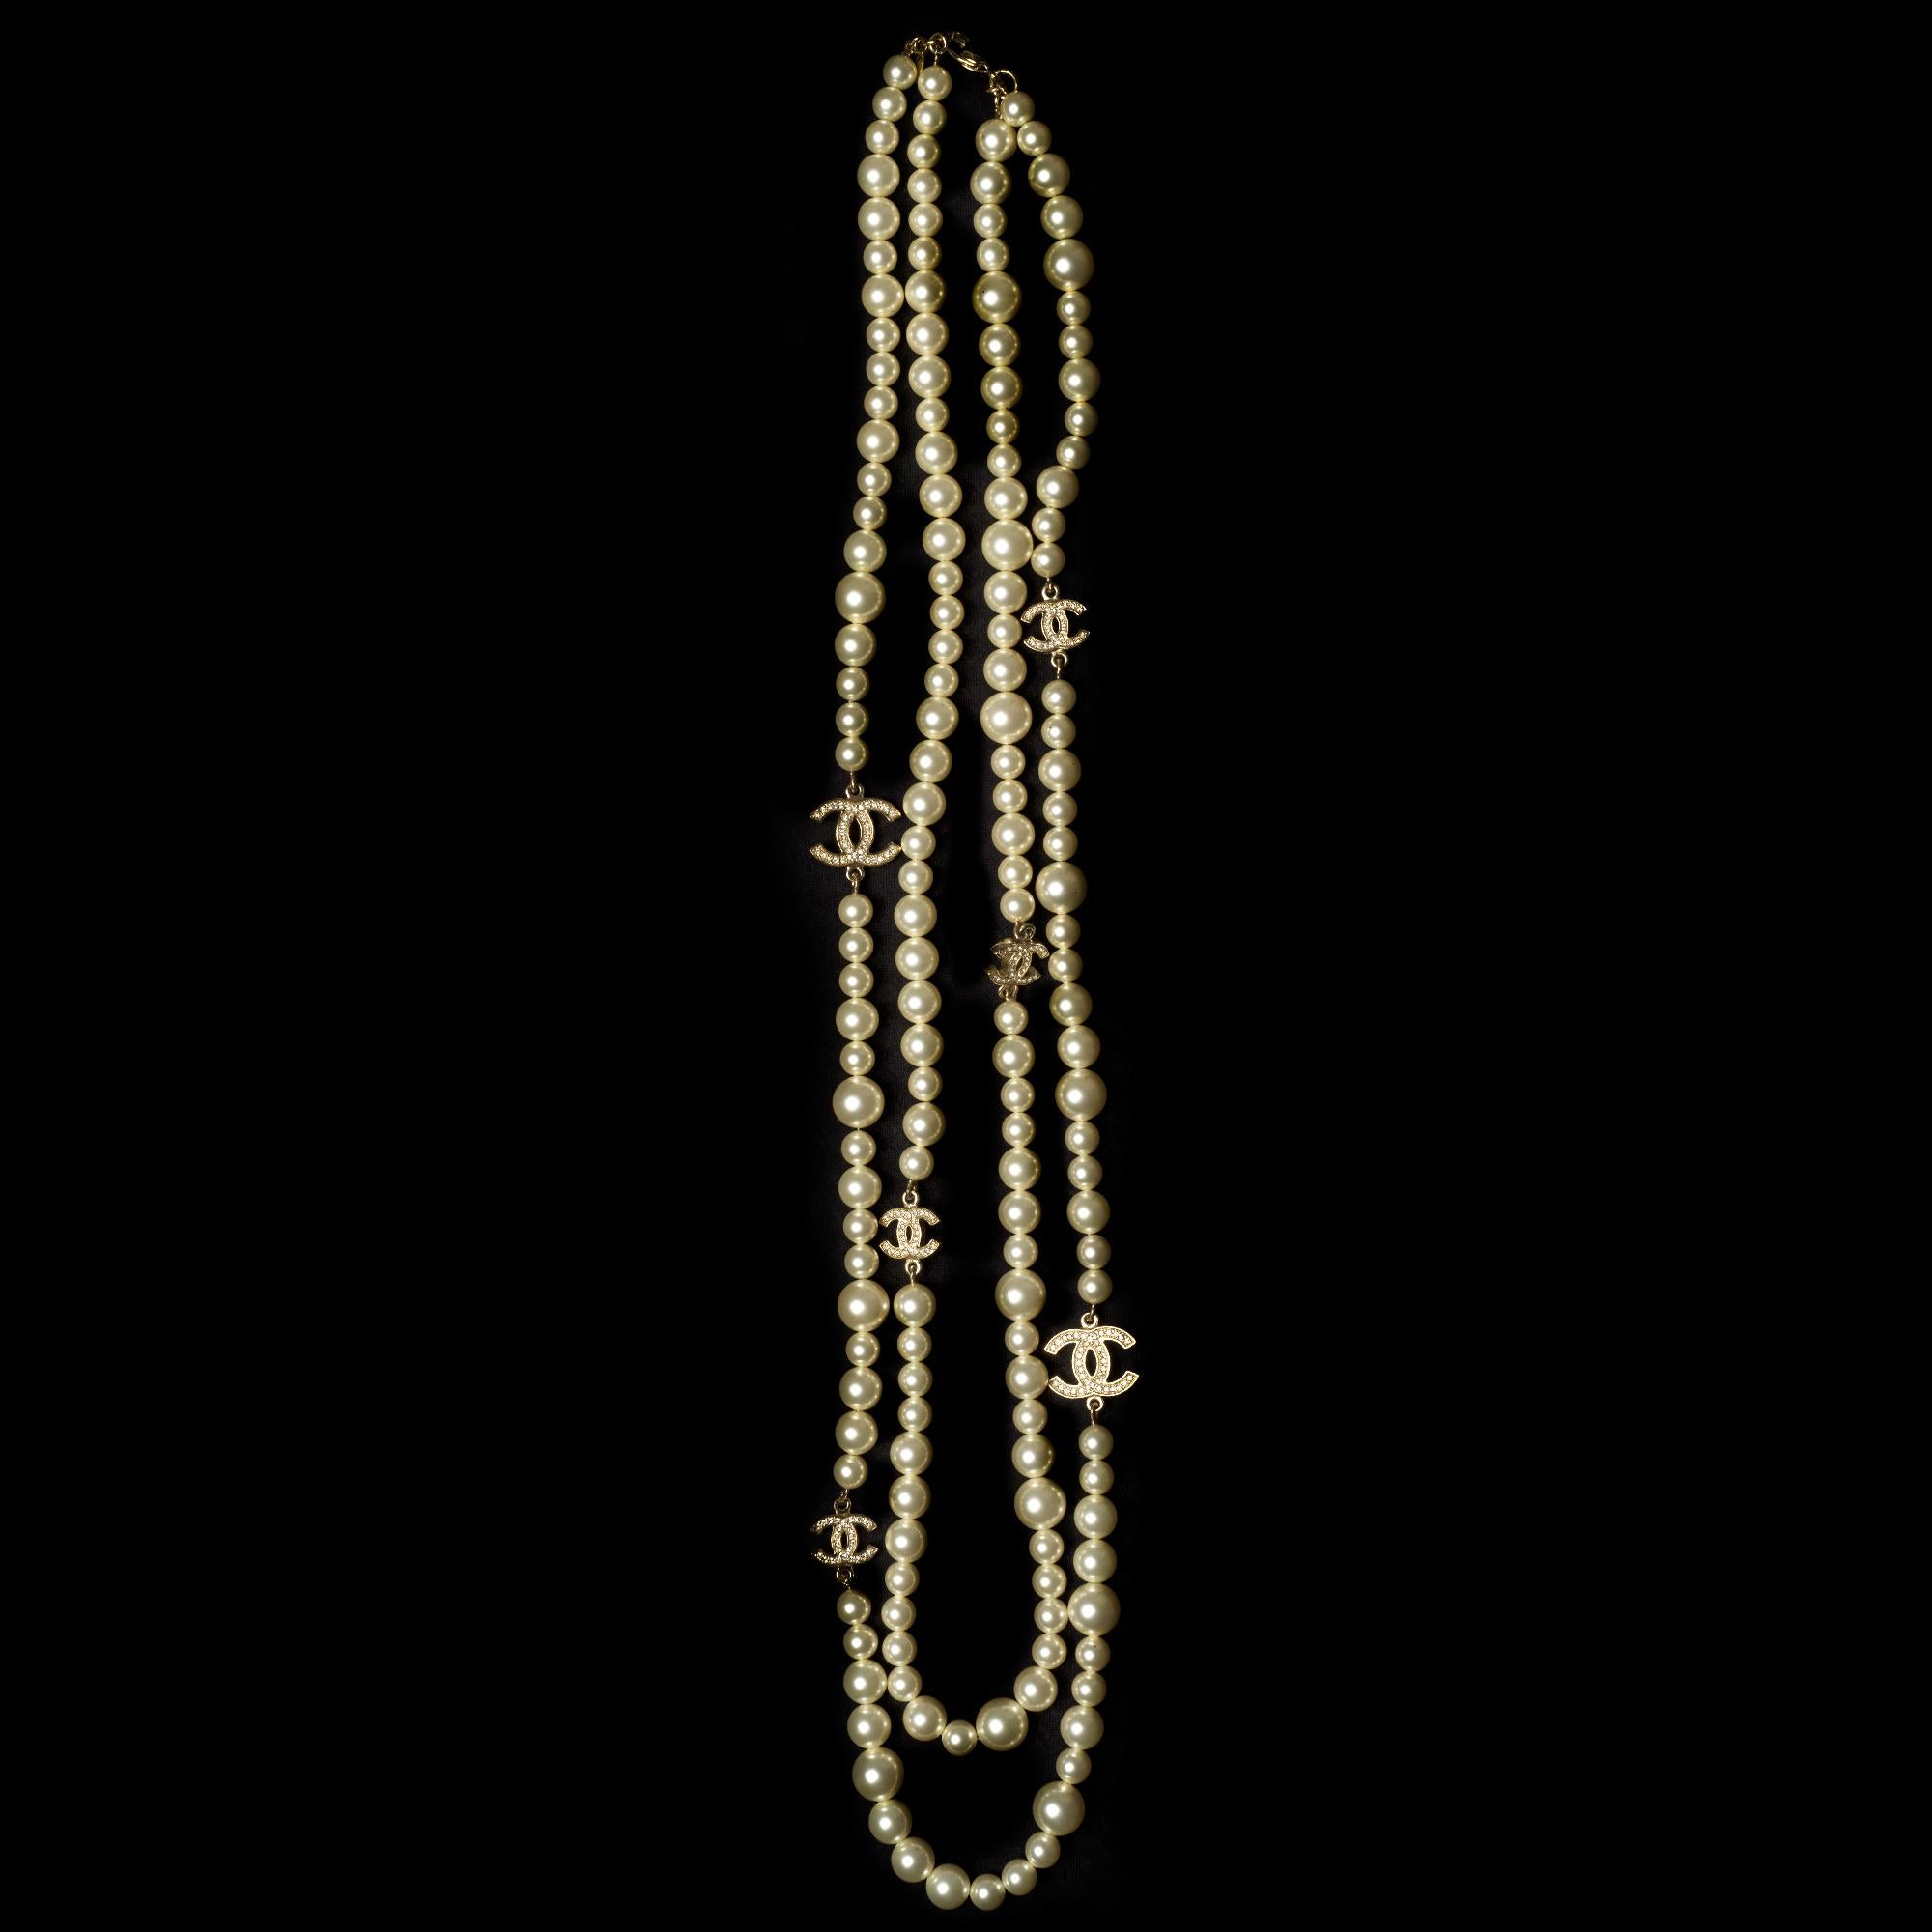 Chanel​ ​CC​ ​double​ ​necklace​ ​with​ ​pearly​ ​pearls,​ ​interspersed​ ​with​ ​the​ ​CC​ ​symbol​ ​in​ ​gold​ ​metal​ ​and​ ​crystal.

​ ​Length:​ ​42cm

Reference:​ ​101450

General​ ​condition:​ ​7.5/10
Sold​ ​with​ ​box